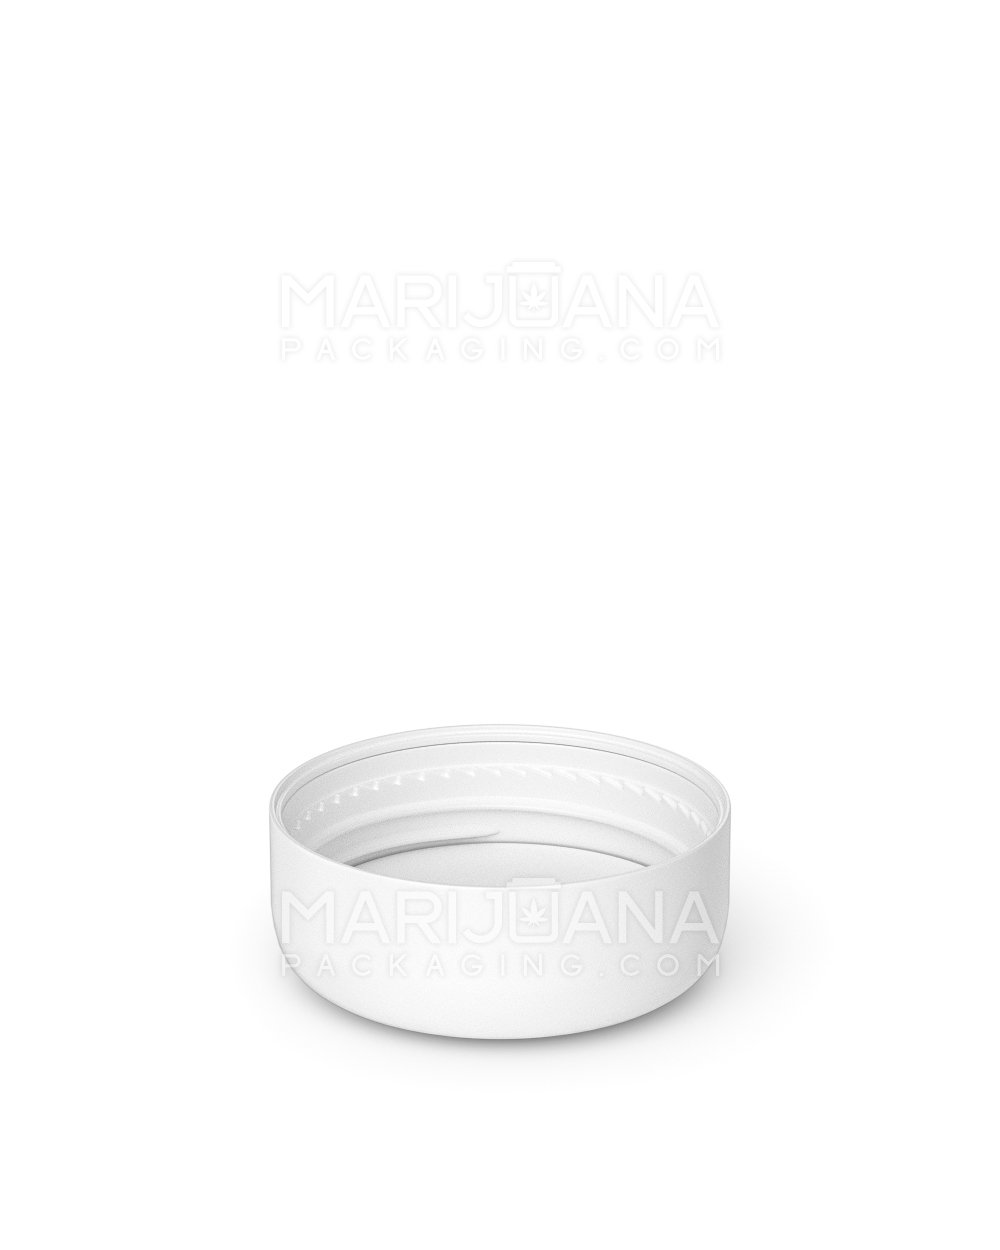 Child Resistant | Smooth Push Down & Turn Plastic Caps w/ Foam Liner | 32mm - Semi Gloss White - 320 Count - 4